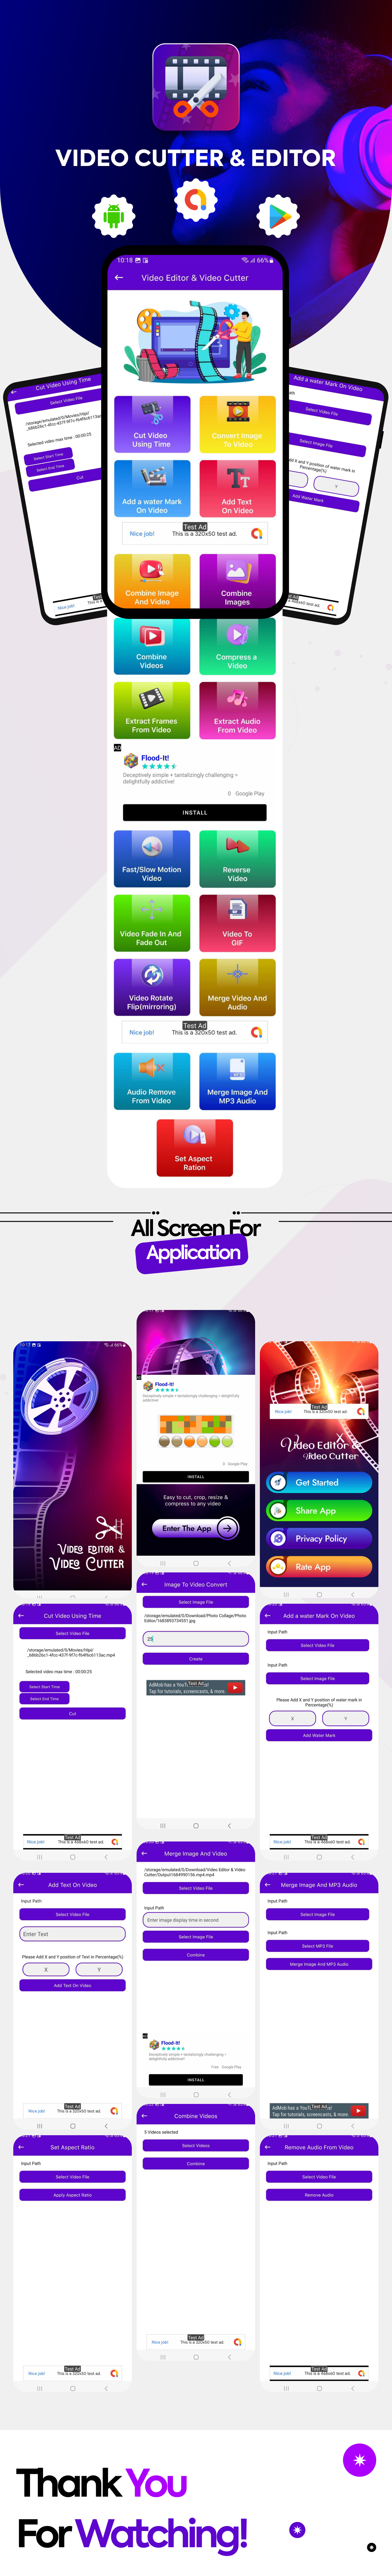 Video Cutter - Video Editor & Maker - Video Cut -Admob - Android - 1